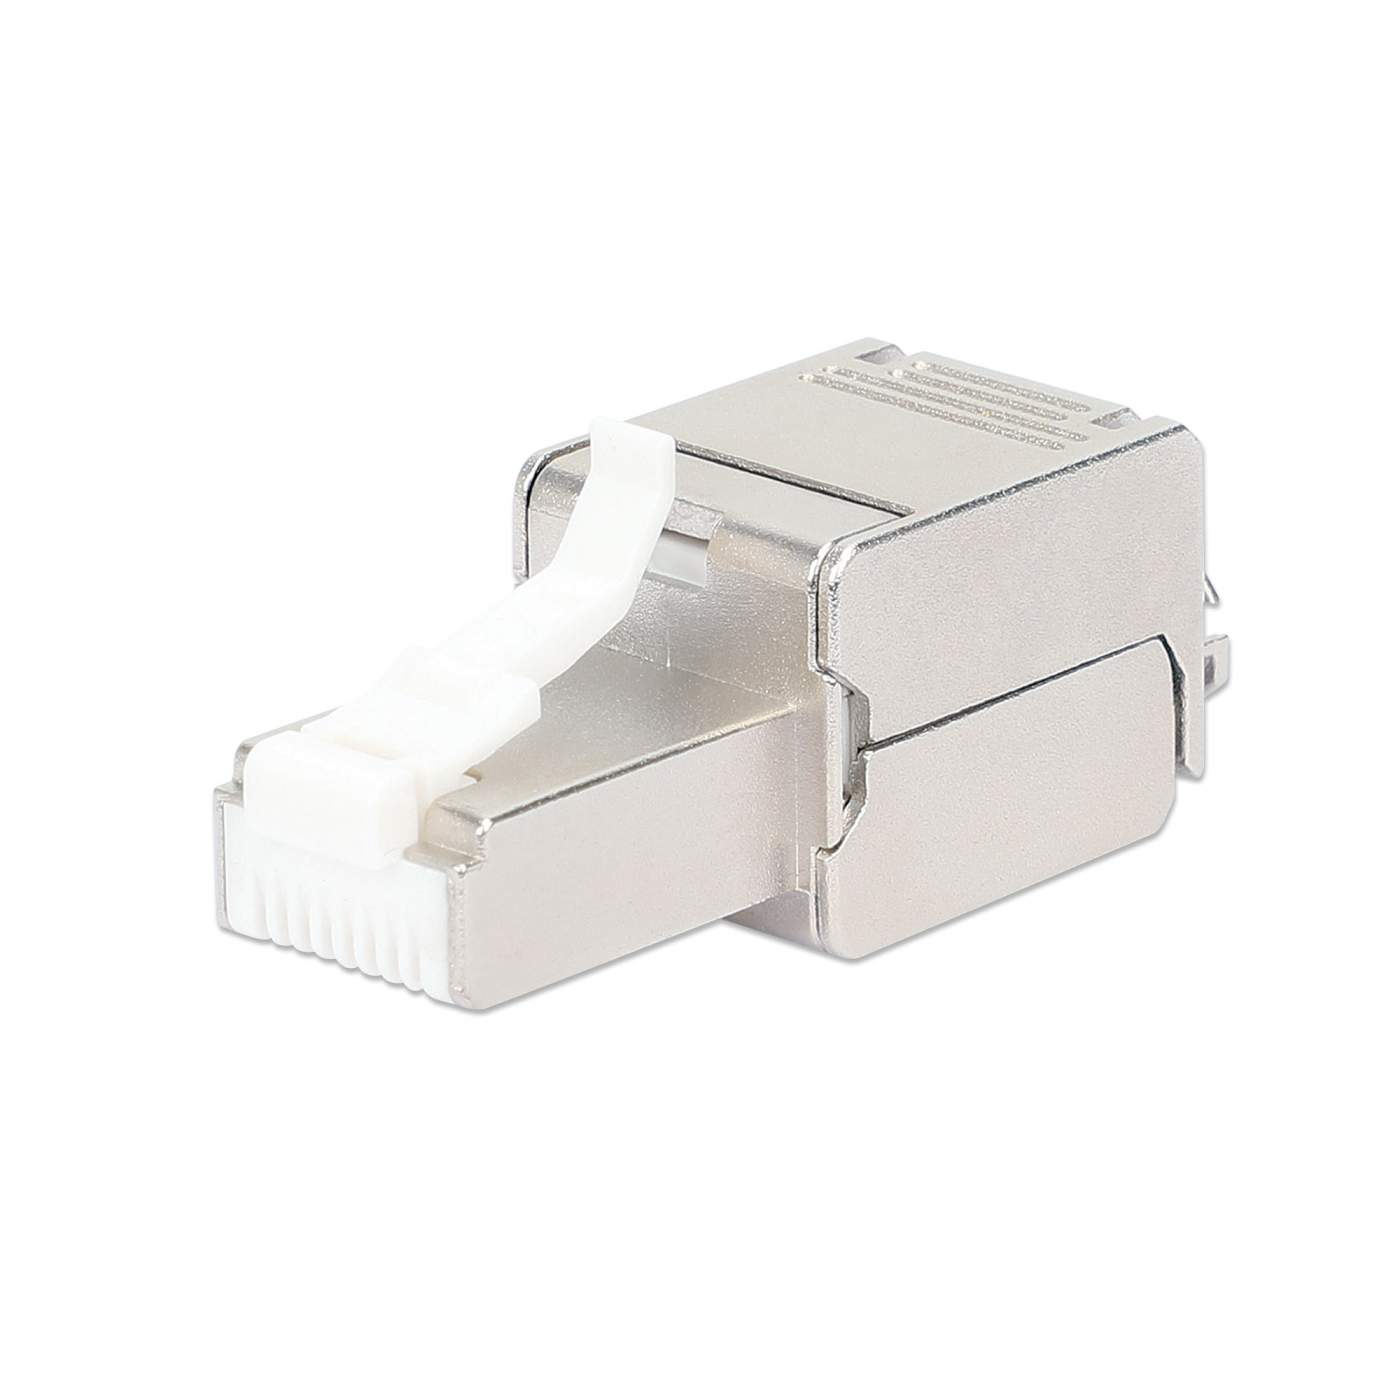 RJ45 Cat6 Connector with Guide - 8P8C - Solid & Stranded Cable - 10 Pack